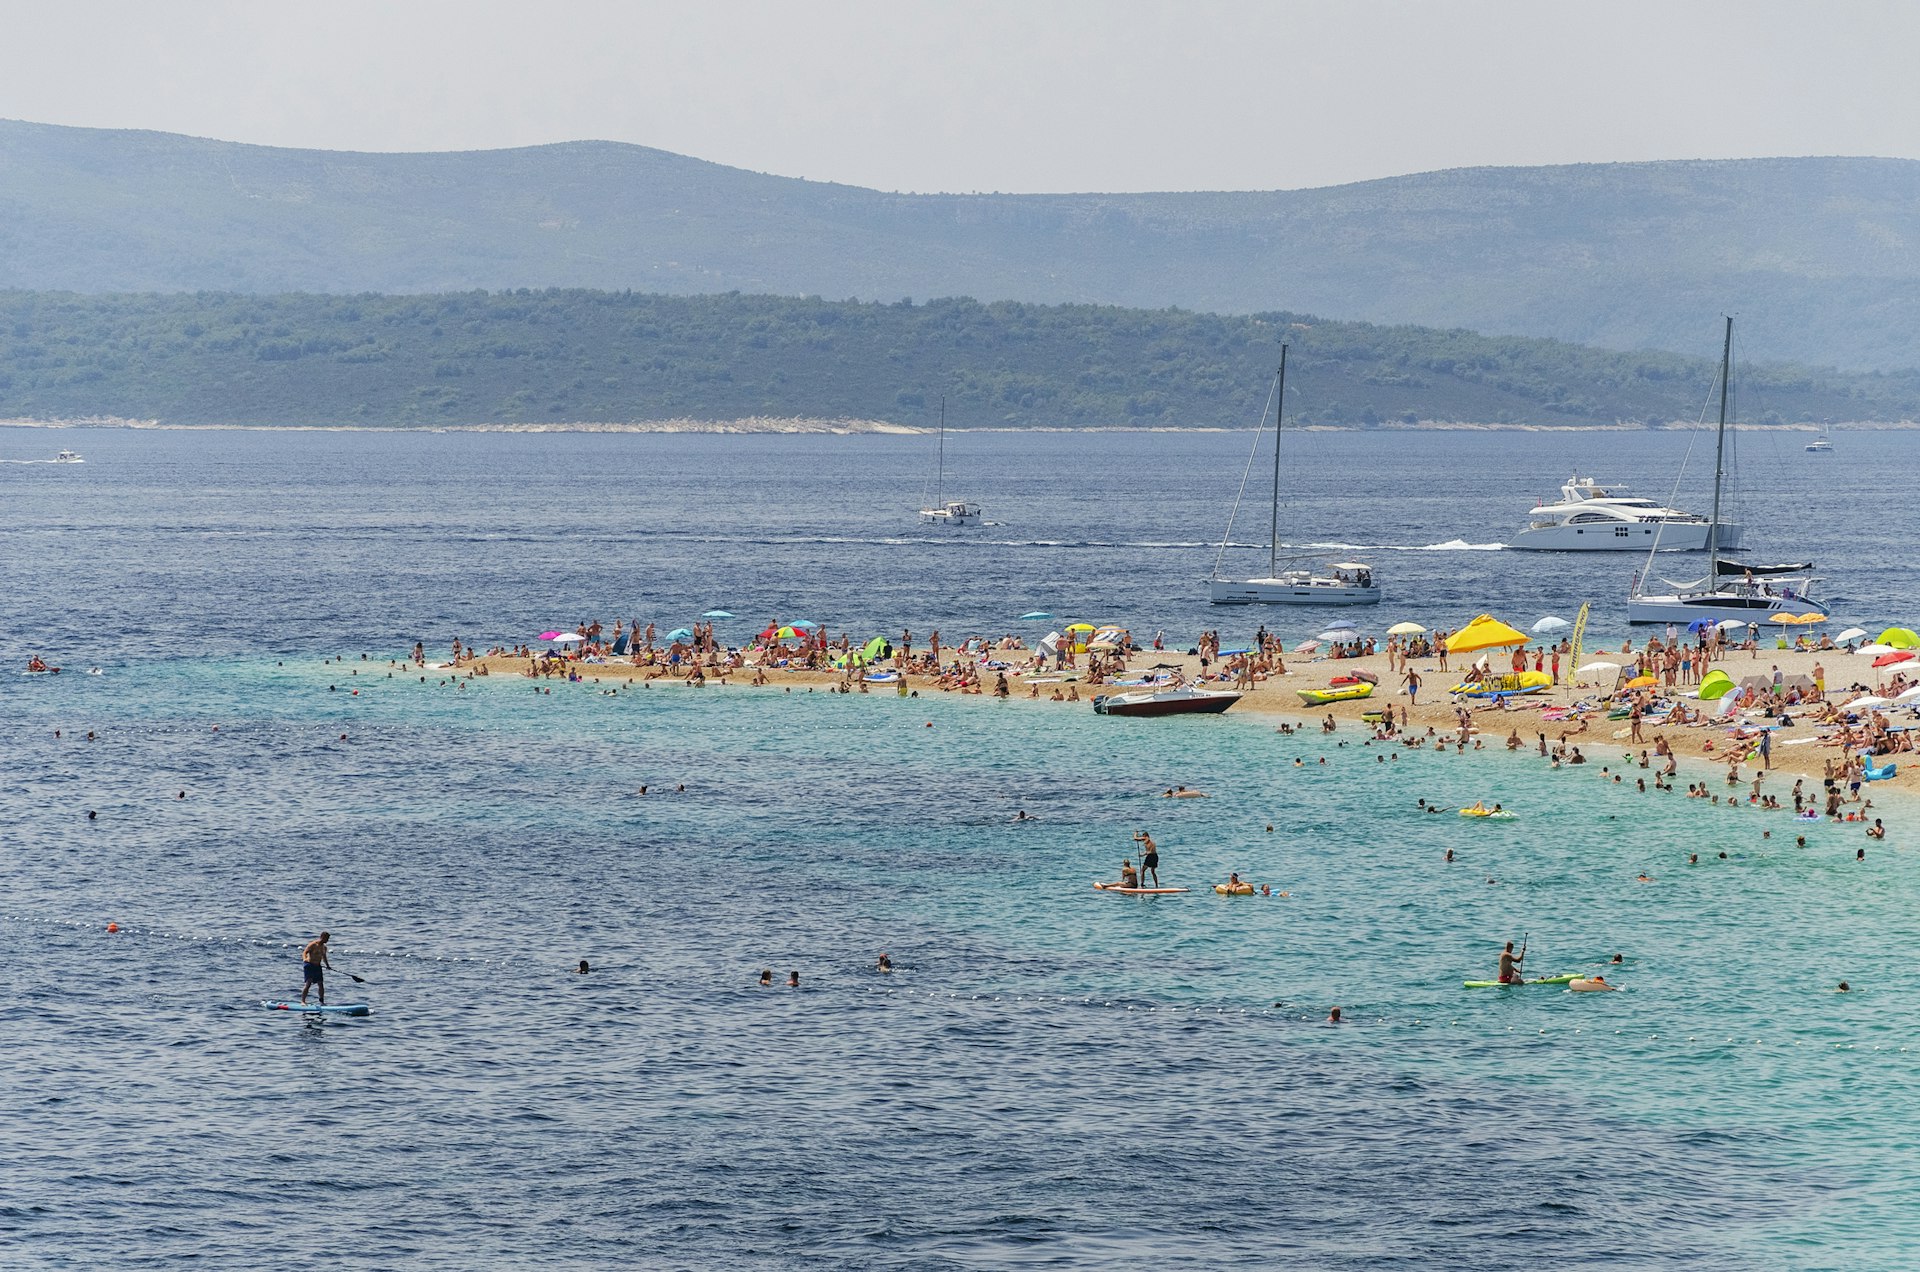 Many people crowd onto a beach spit in Croatia while others play or paddleboard in the sea